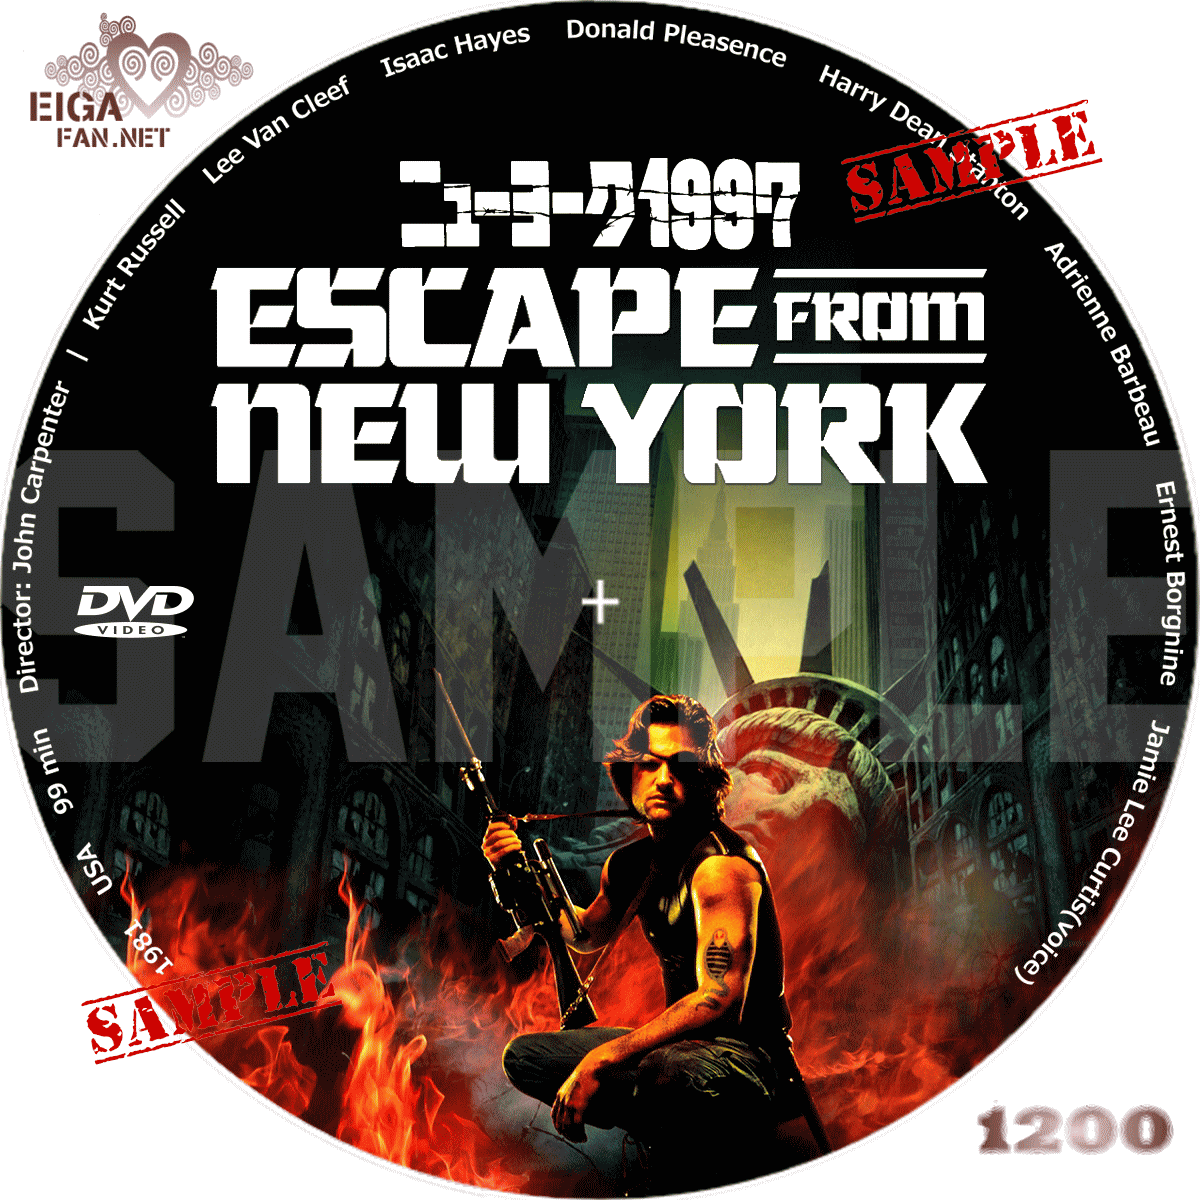 DVDラベル】ニューヨーク１９９７／ESCAPE FROM NEW YORK (1981)第１作